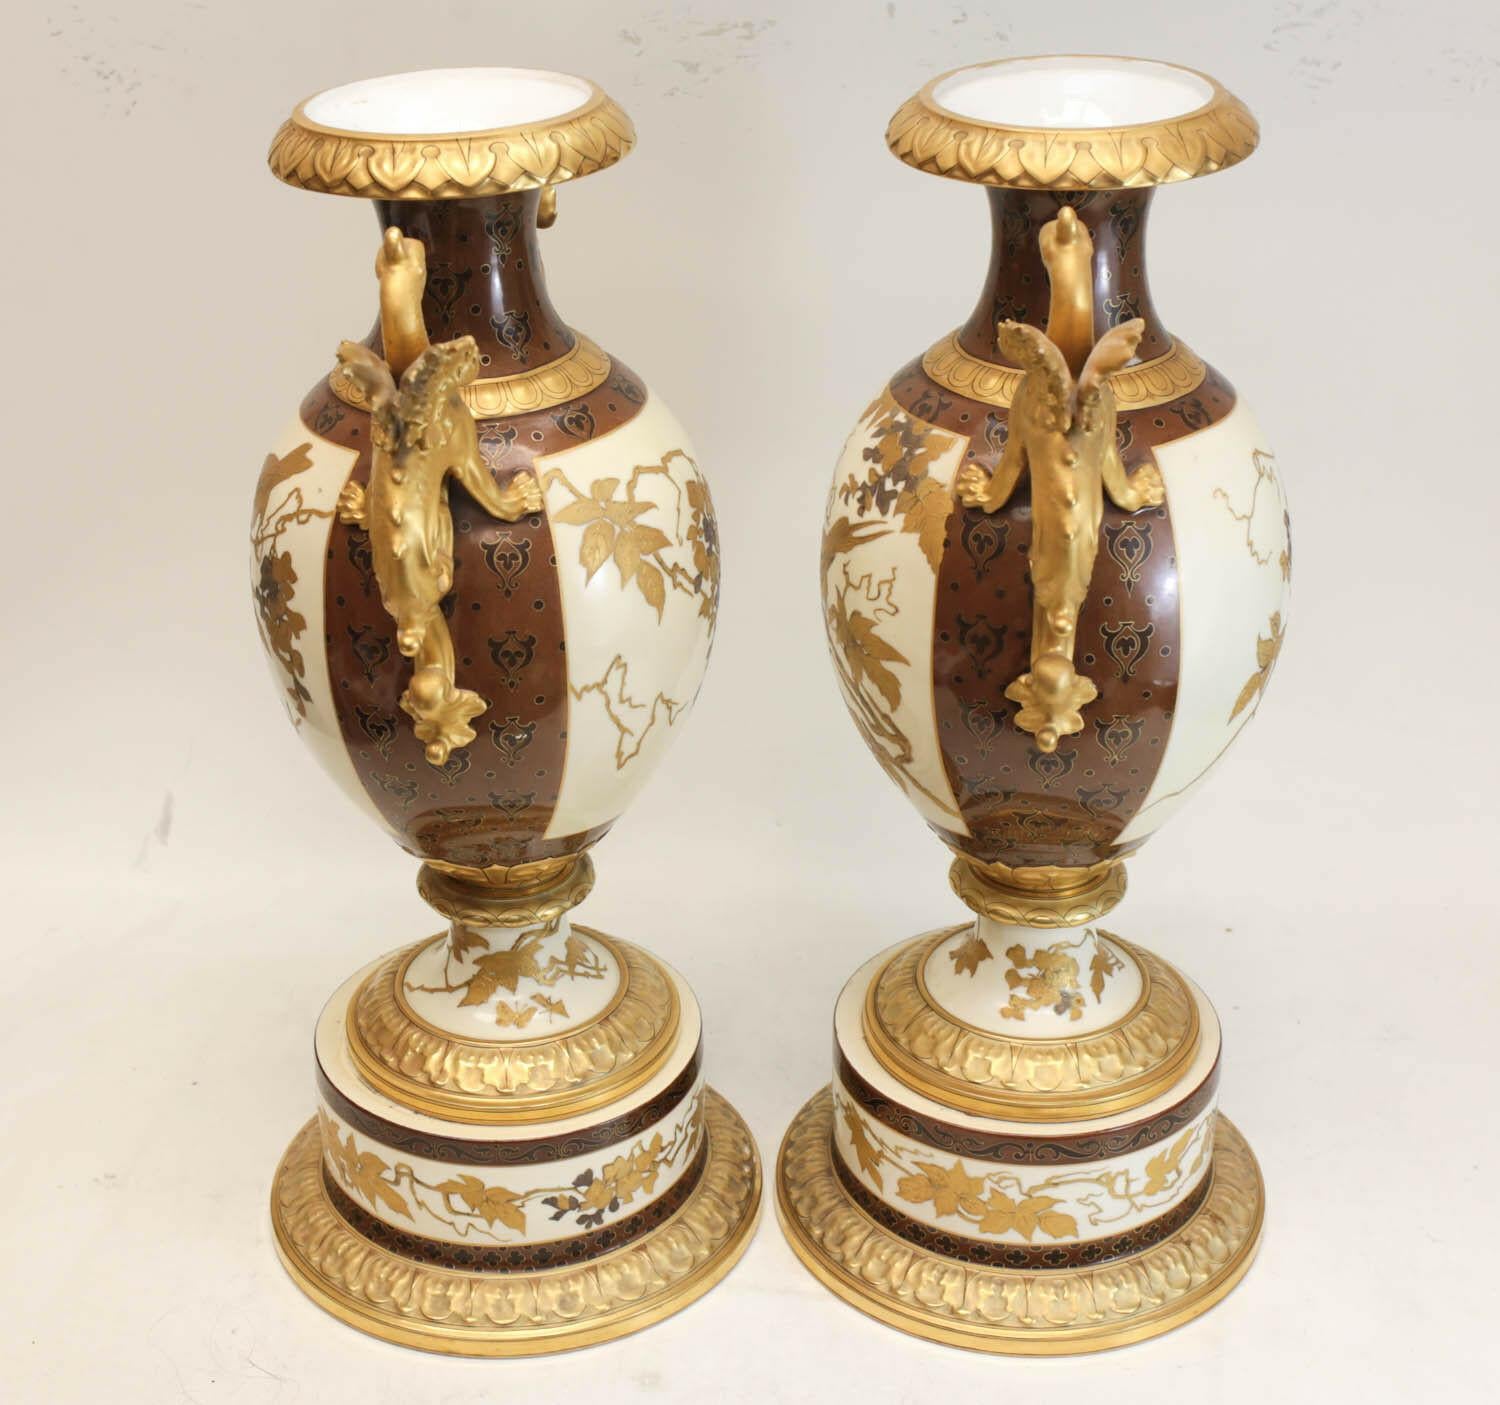 Pair of Pirkenhammer Porcelain Aesthetic Gold Encrusted Dragon Vases, circa 1880 In Good Condition For Sale In Pasadena, CA